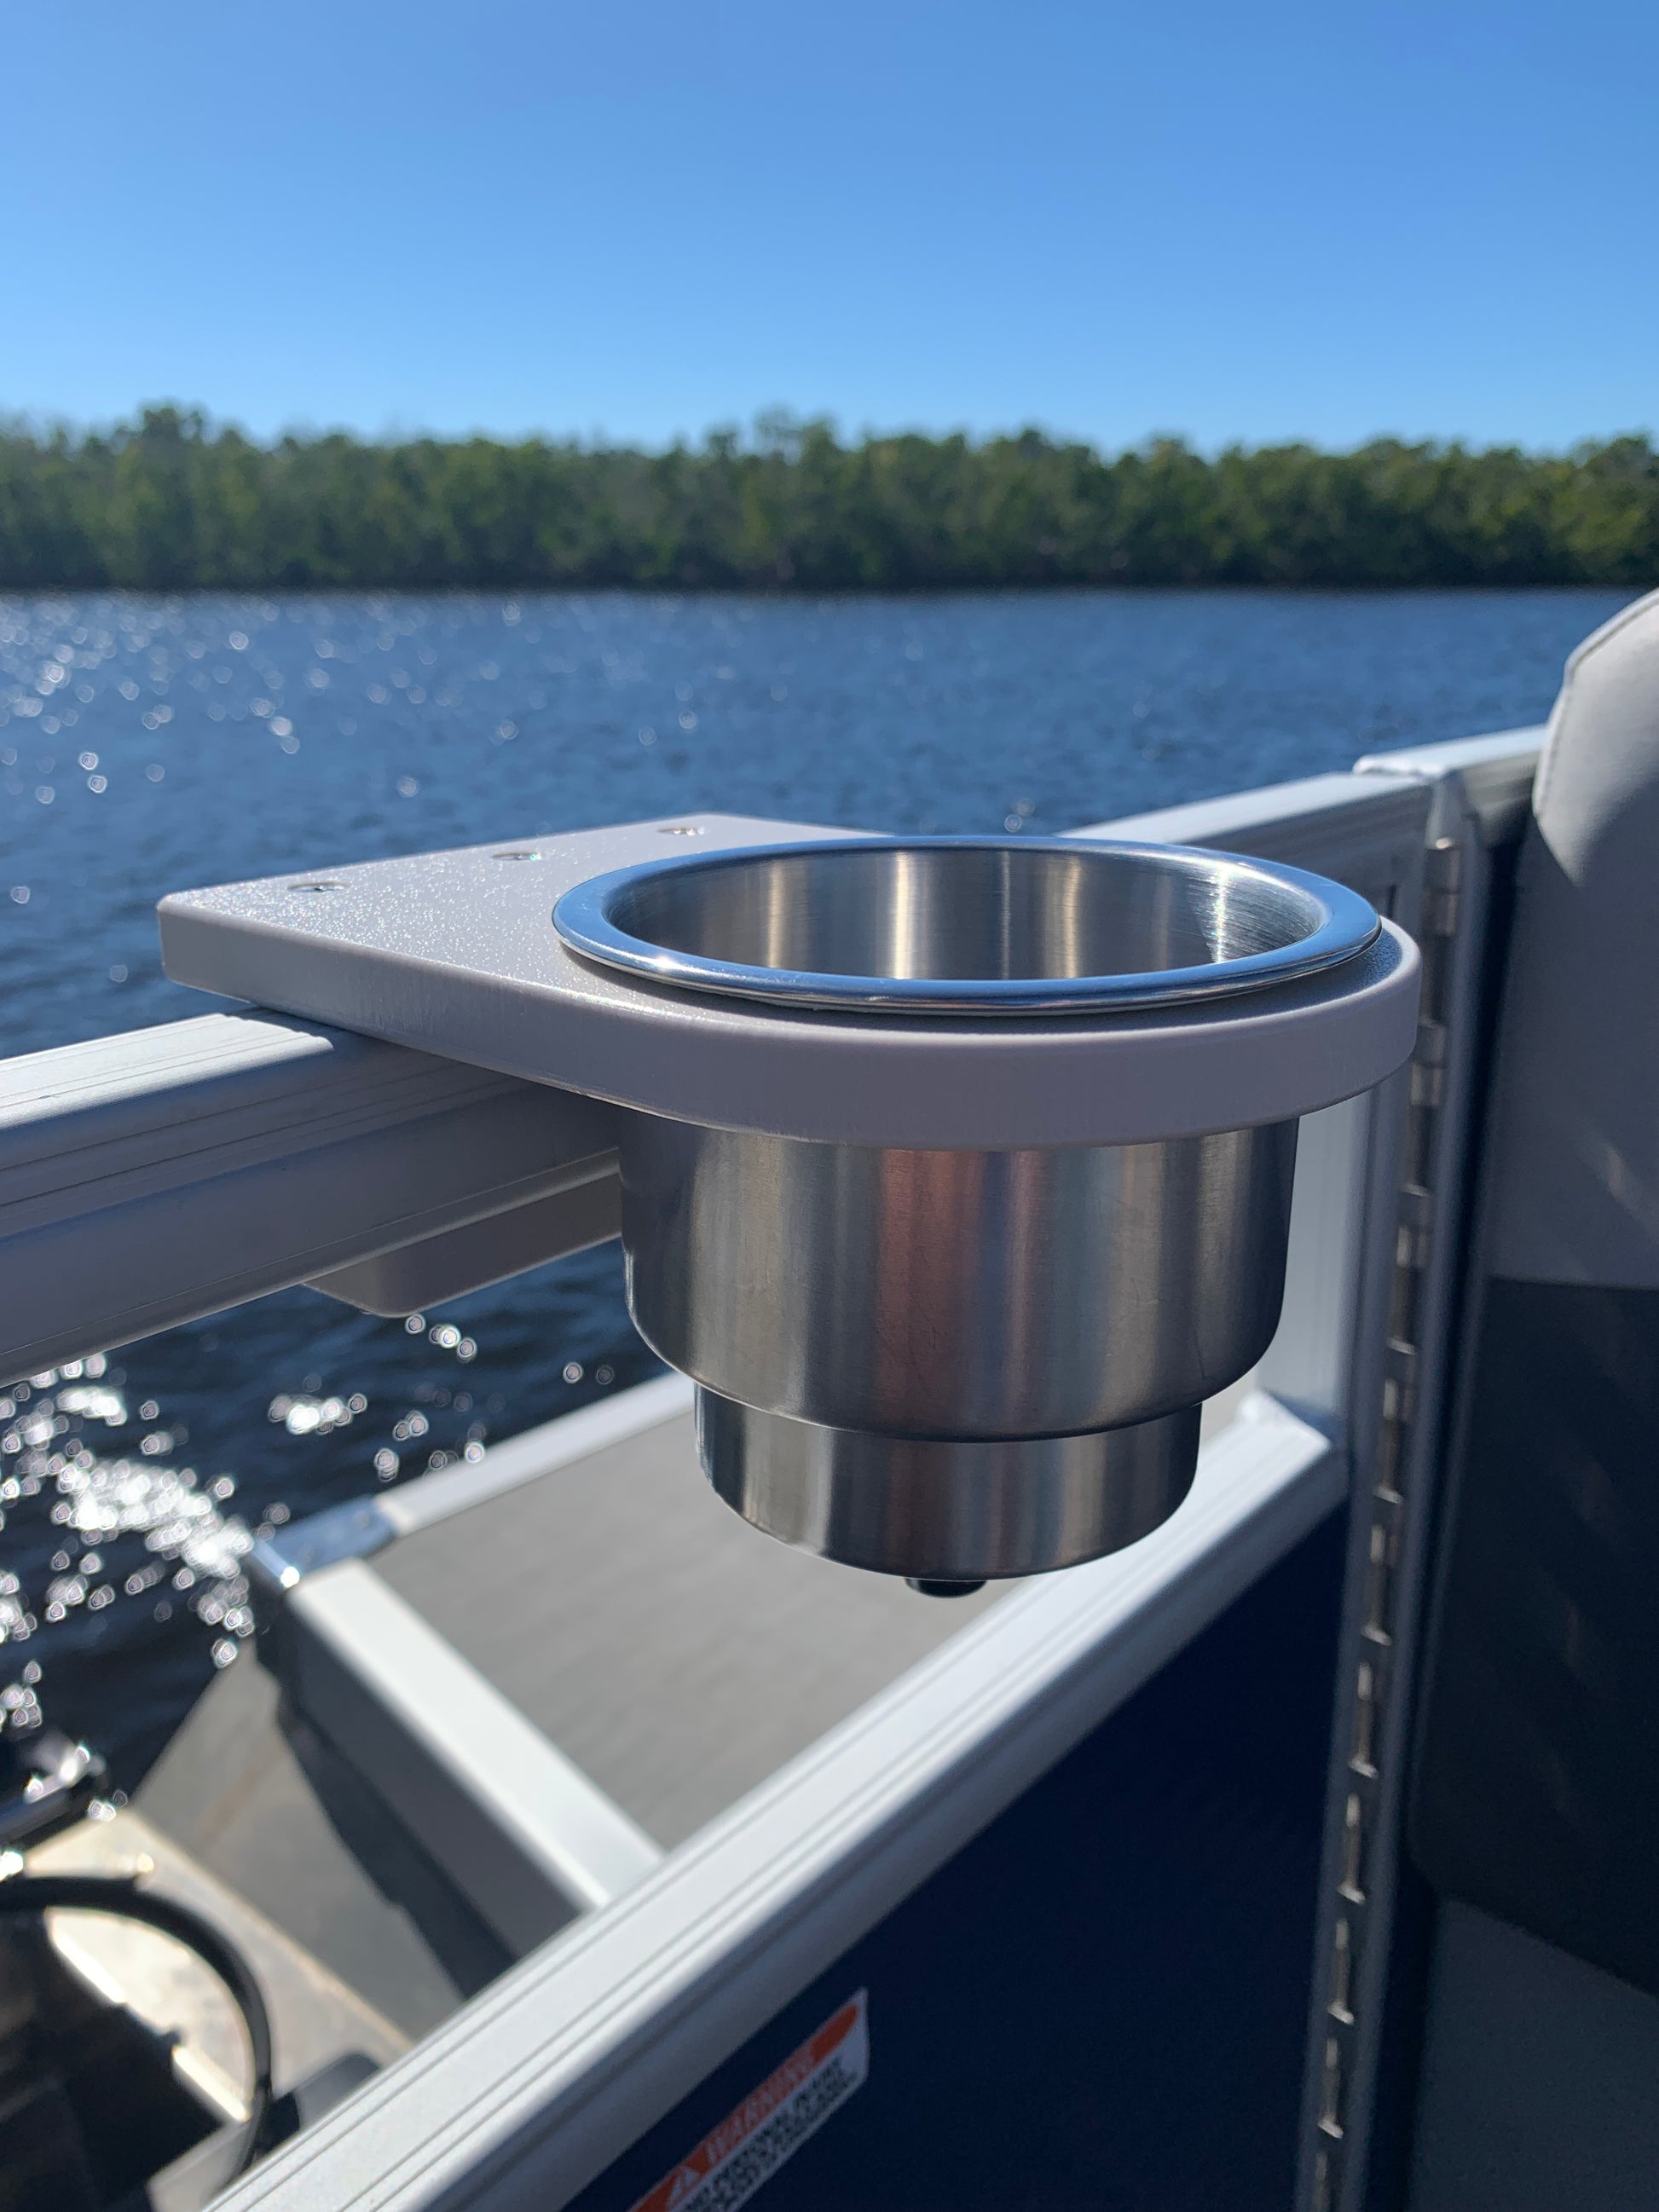 Pontoon Rail - Double Cup and Rod Holder with Tool Organizer slots